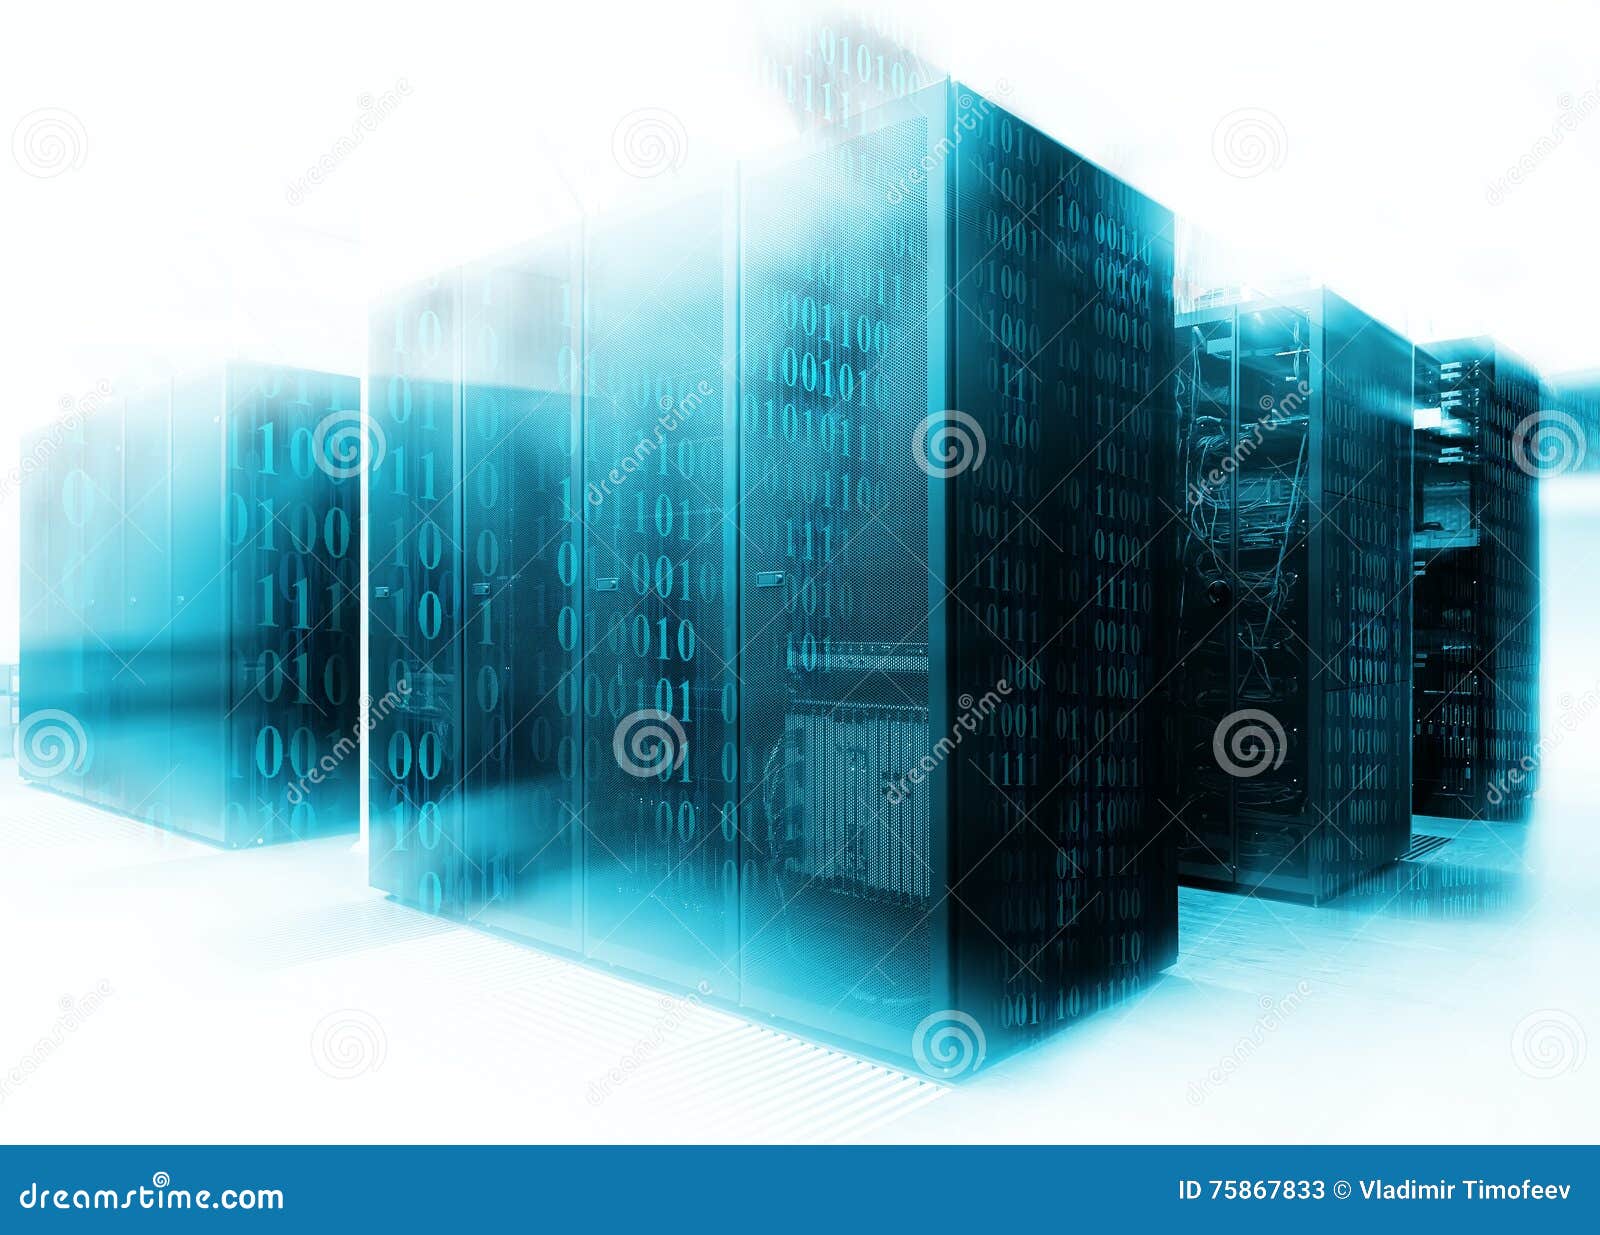 abstract of modern high tech internet data center room with rows of racks with network and server hardware.